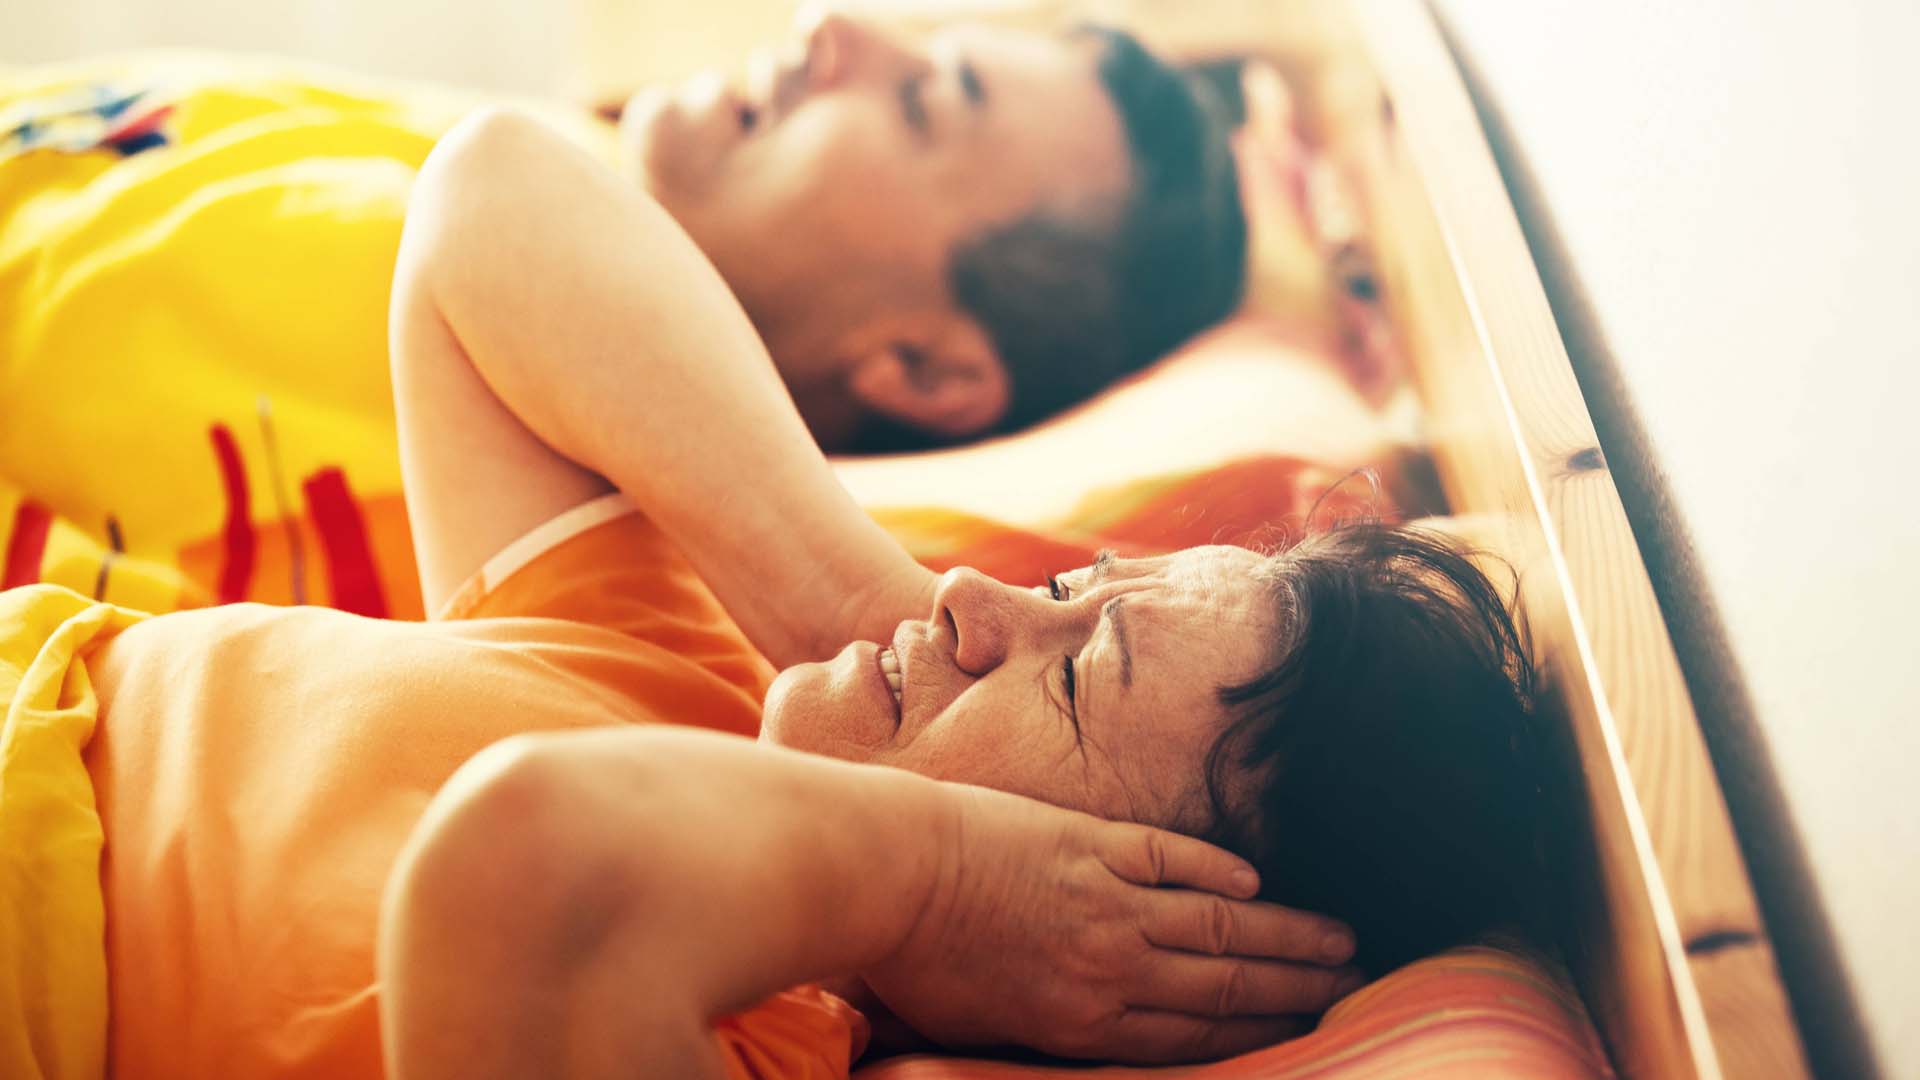 Couple lying in bed, woman has hands over ears